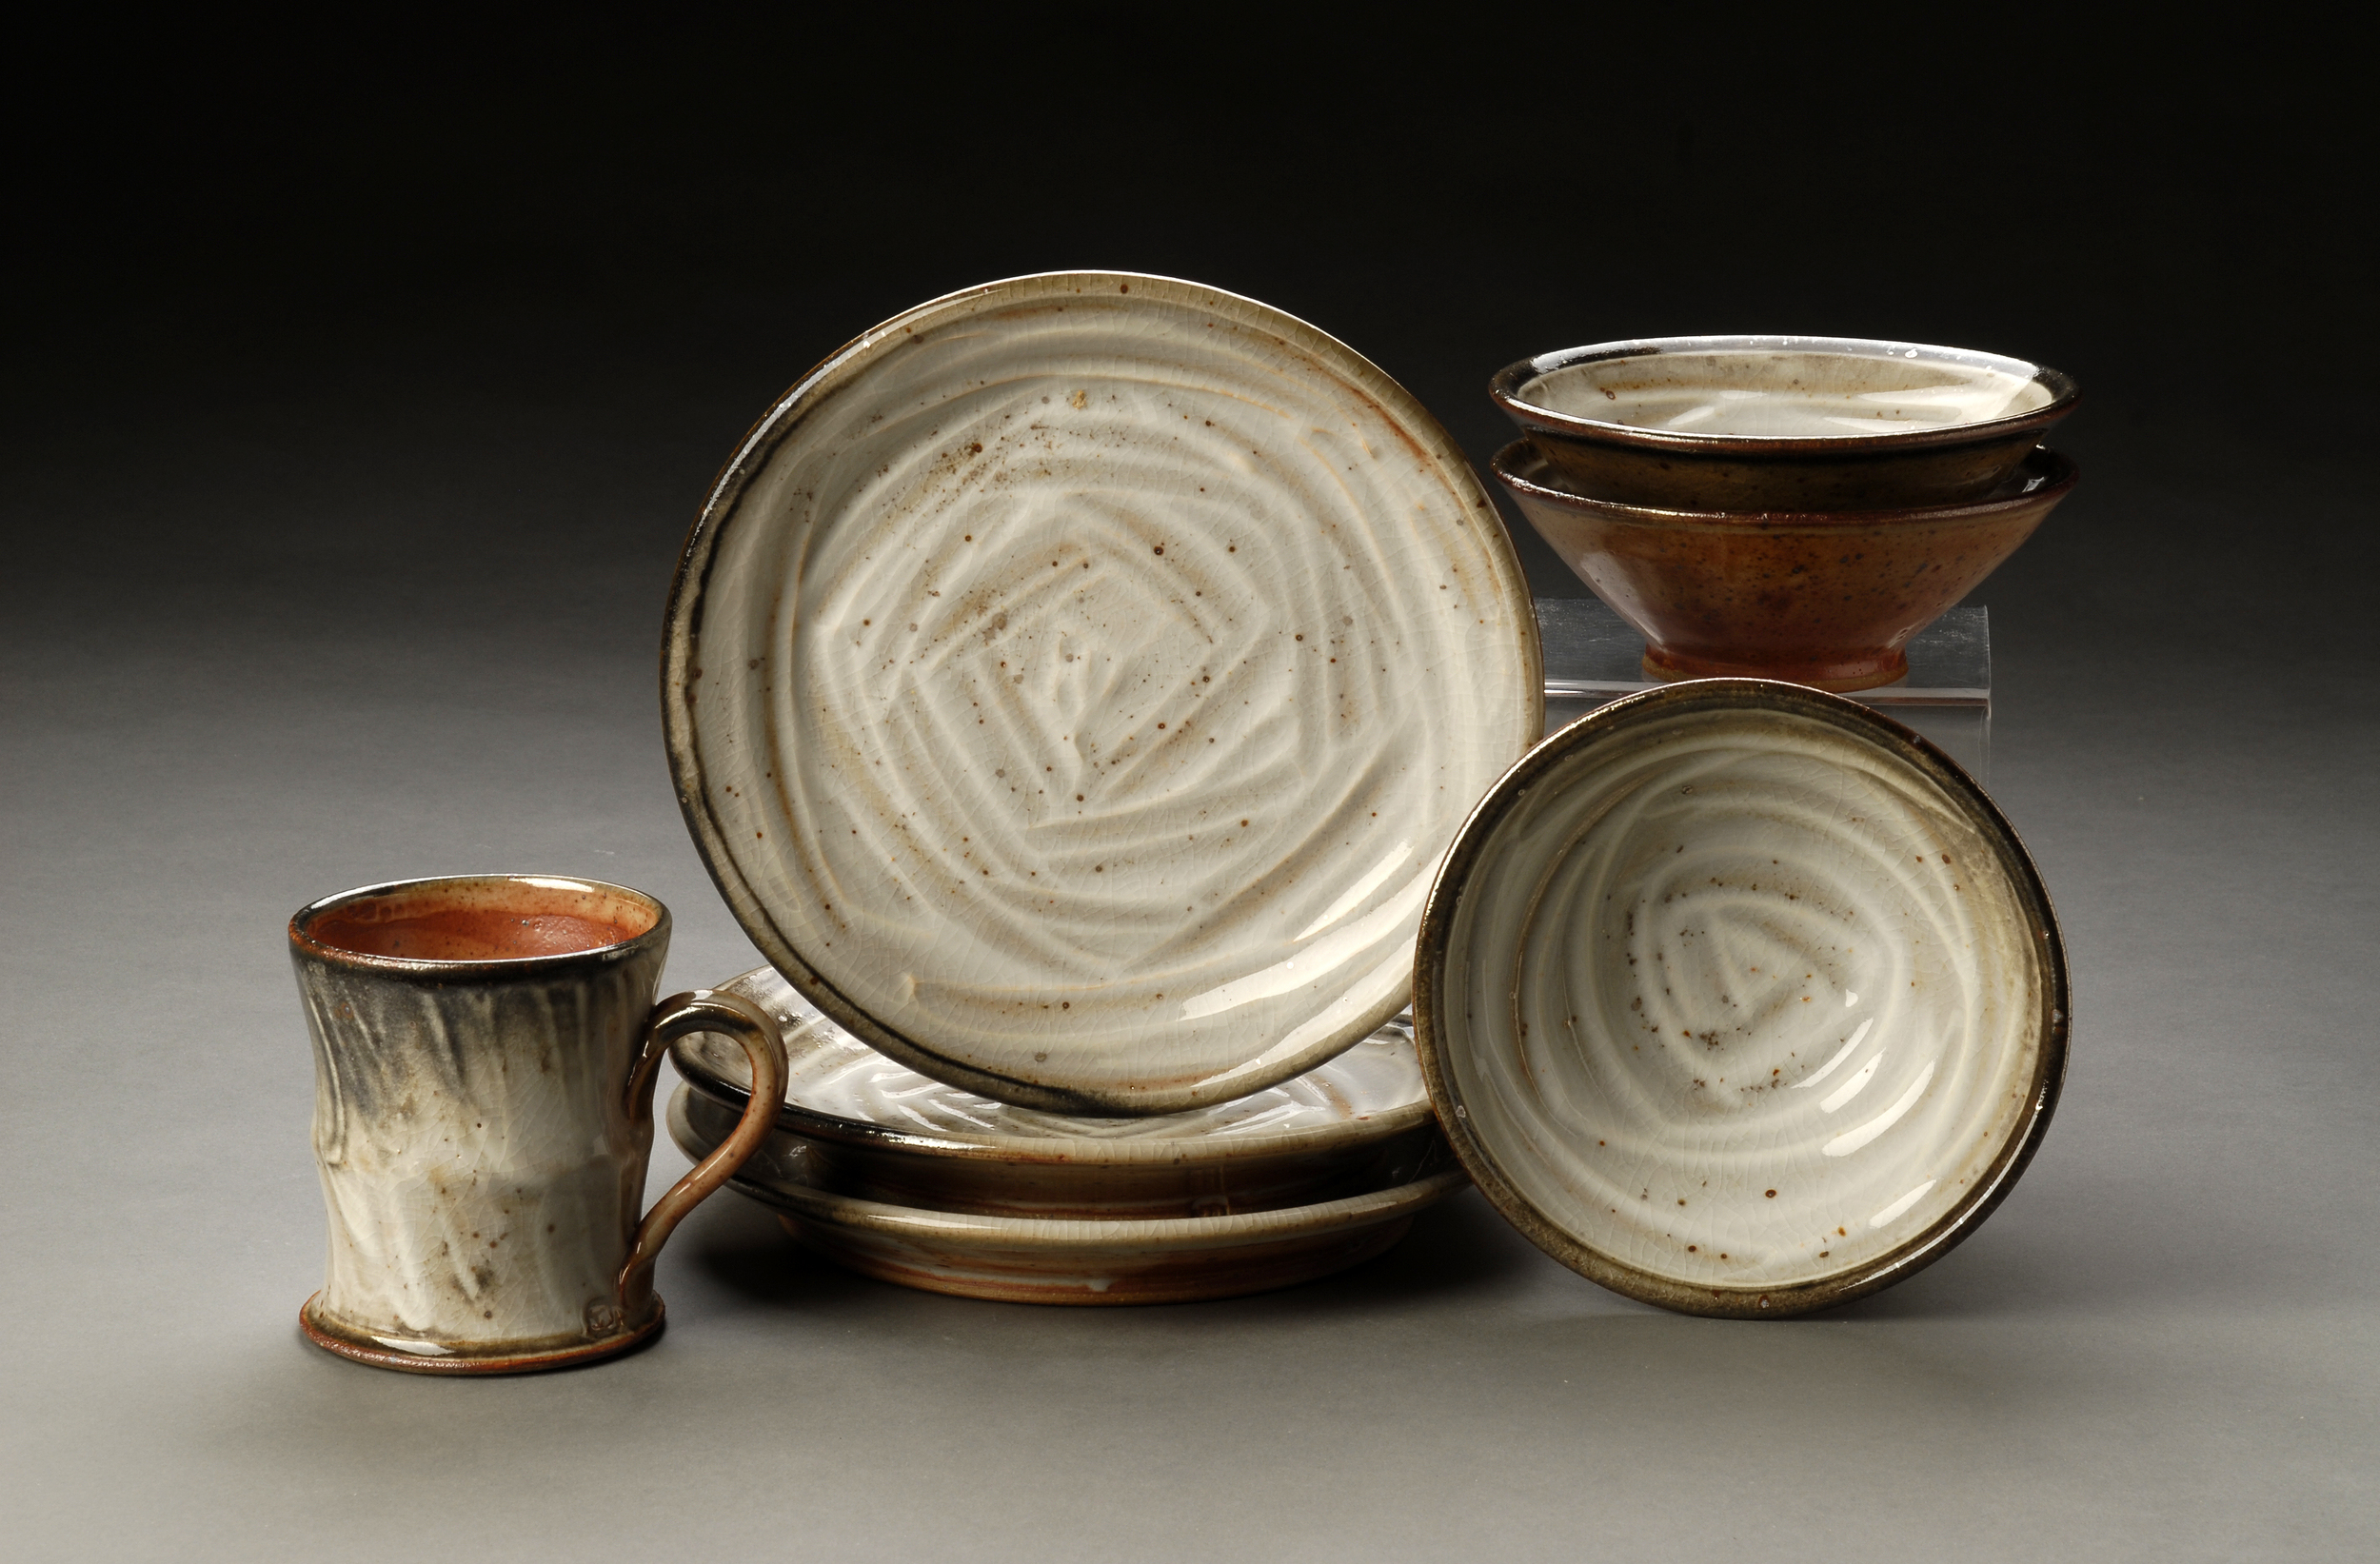 Dinnerware Place Setting with Porcelain Slip and Shino Glaze